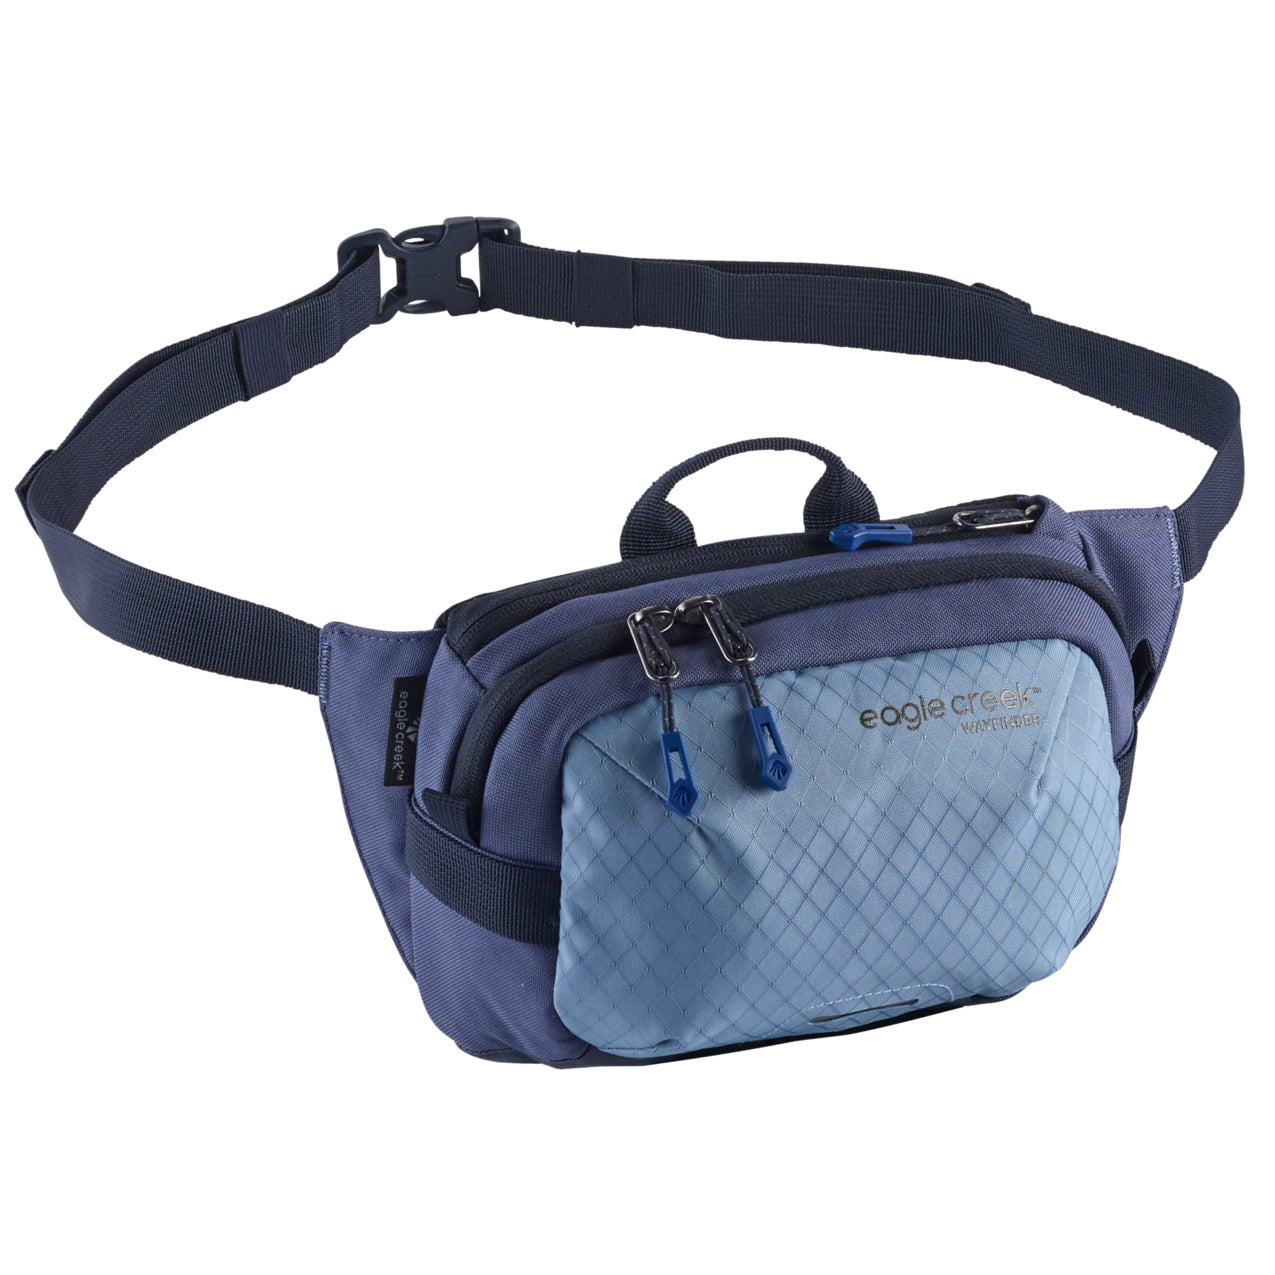 Unisex Eagle Creek Wayfinder Small Waist Pack in Arctic Blue from the front